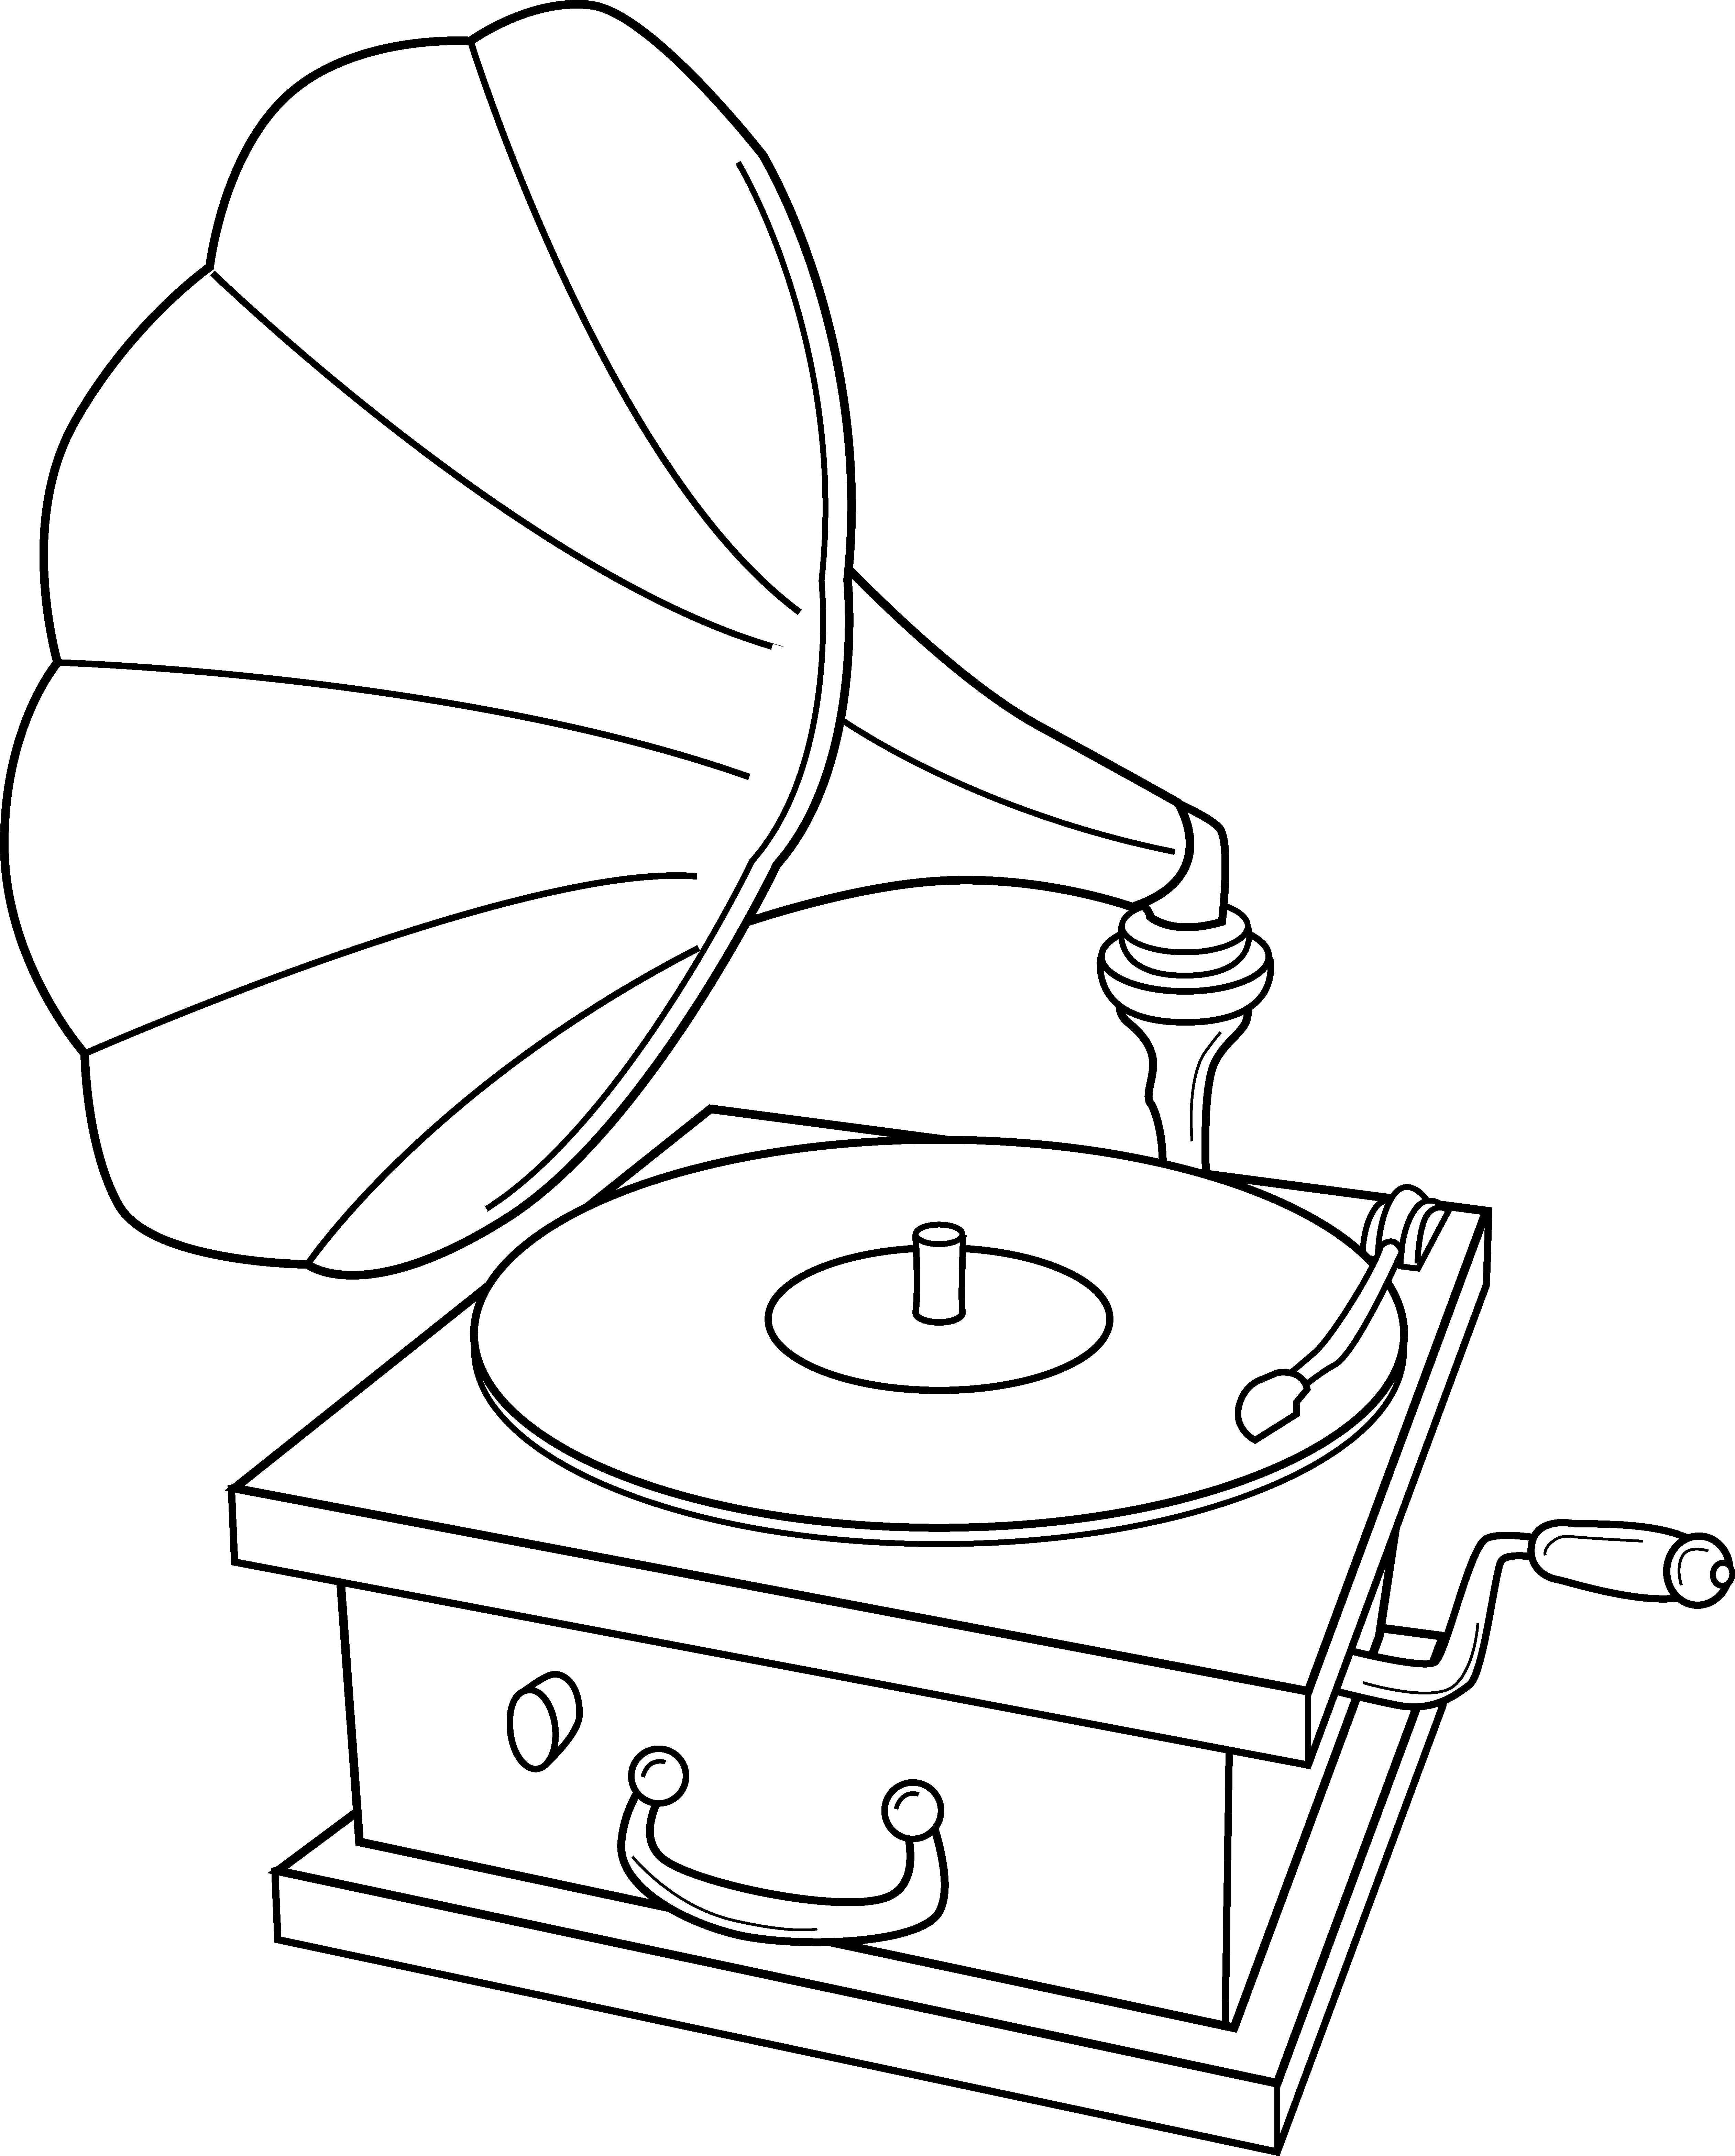 Plane clipart old school. Record player drawing at